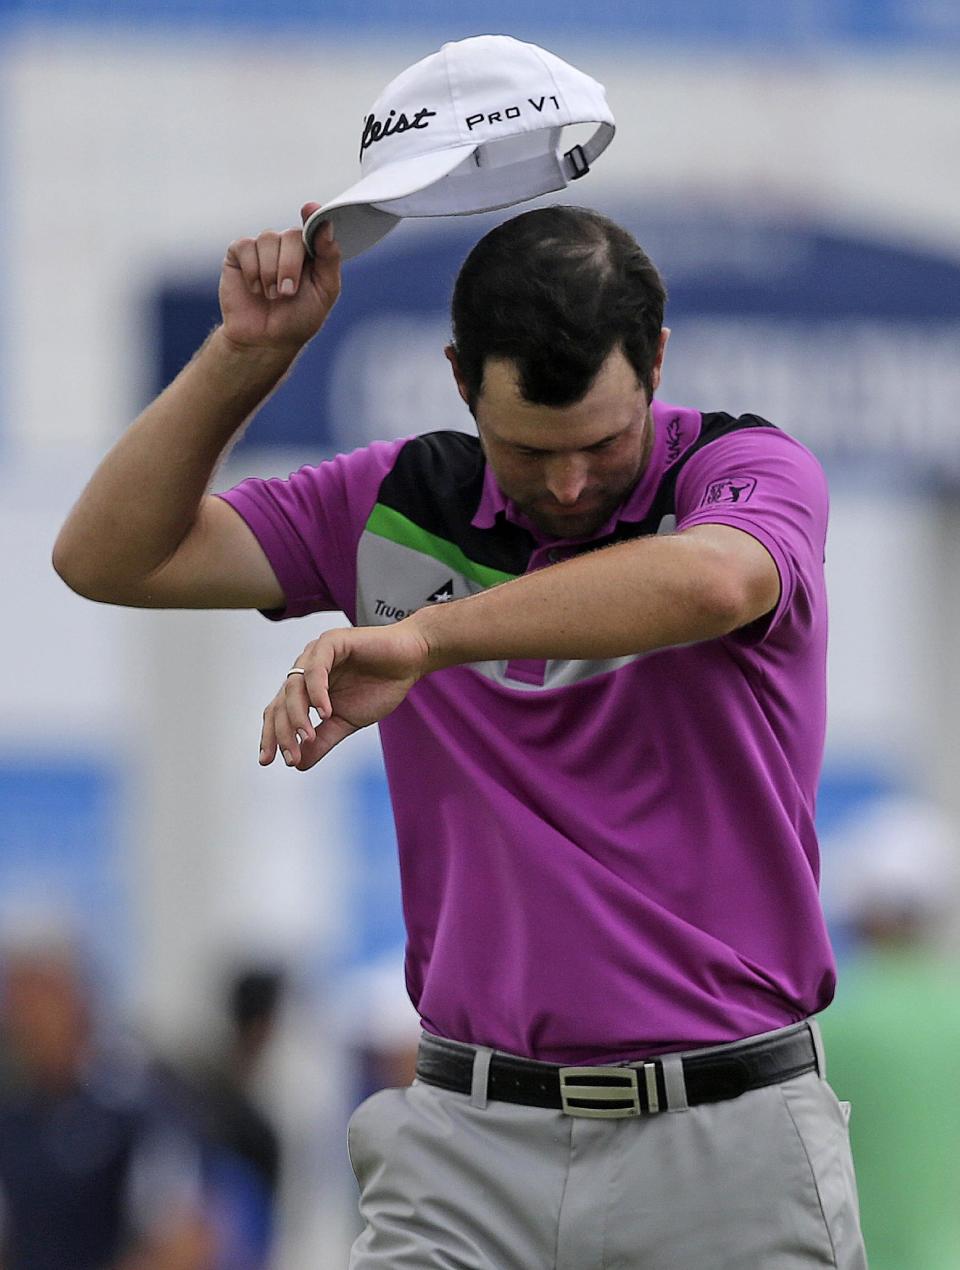 Robert Streb reacts after his double bogey on the ninth hole while tied for first place during the final round of the Zurich Classic golf tournament at TPC Louisiana in Avondale, La., Sunday, April 27, 2014. (AP Photo/Gerald Herbert)